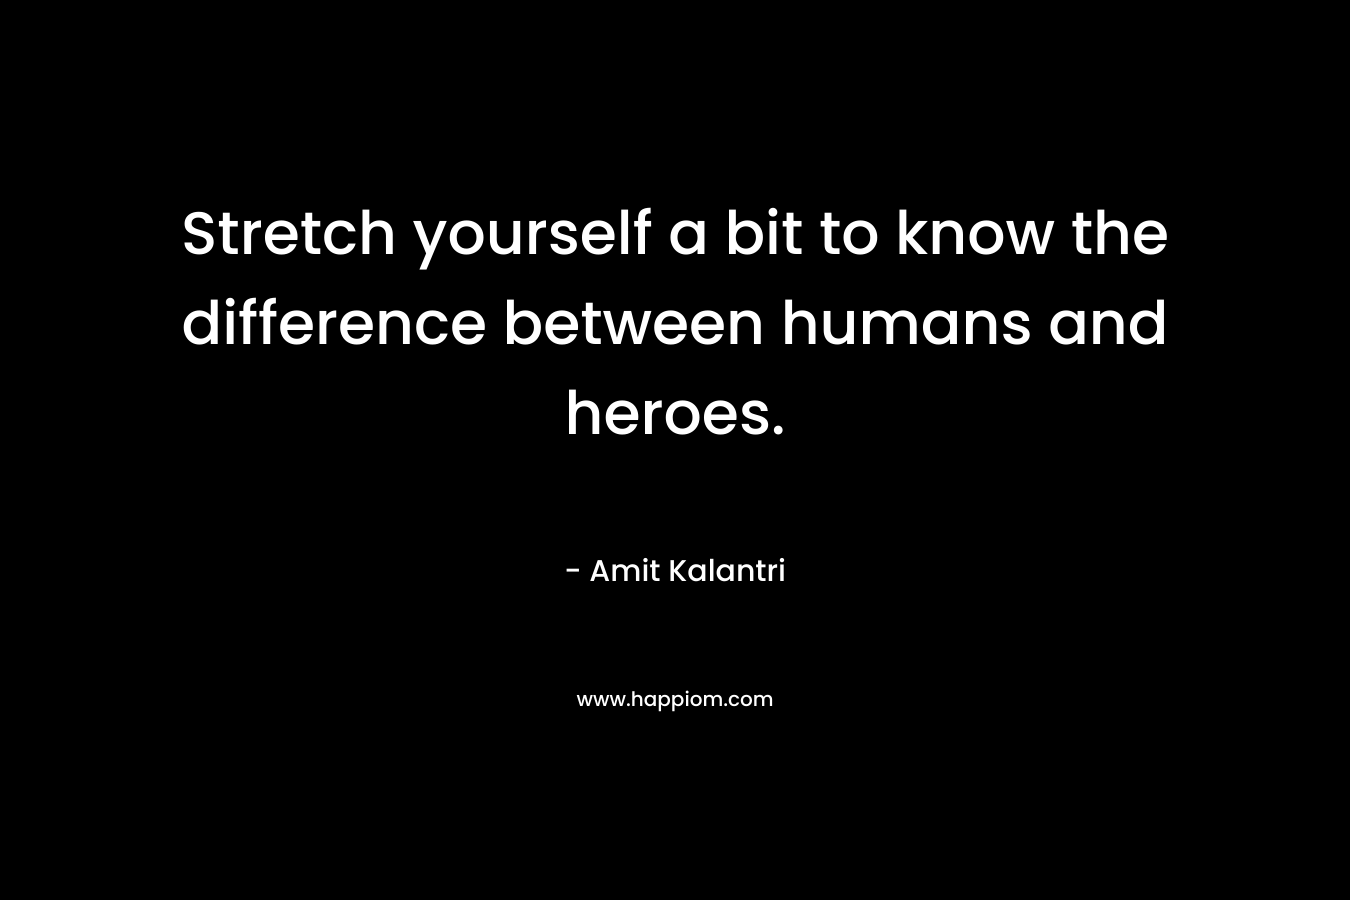 Stretch yourself a bit to know the difference between humans and heroes.